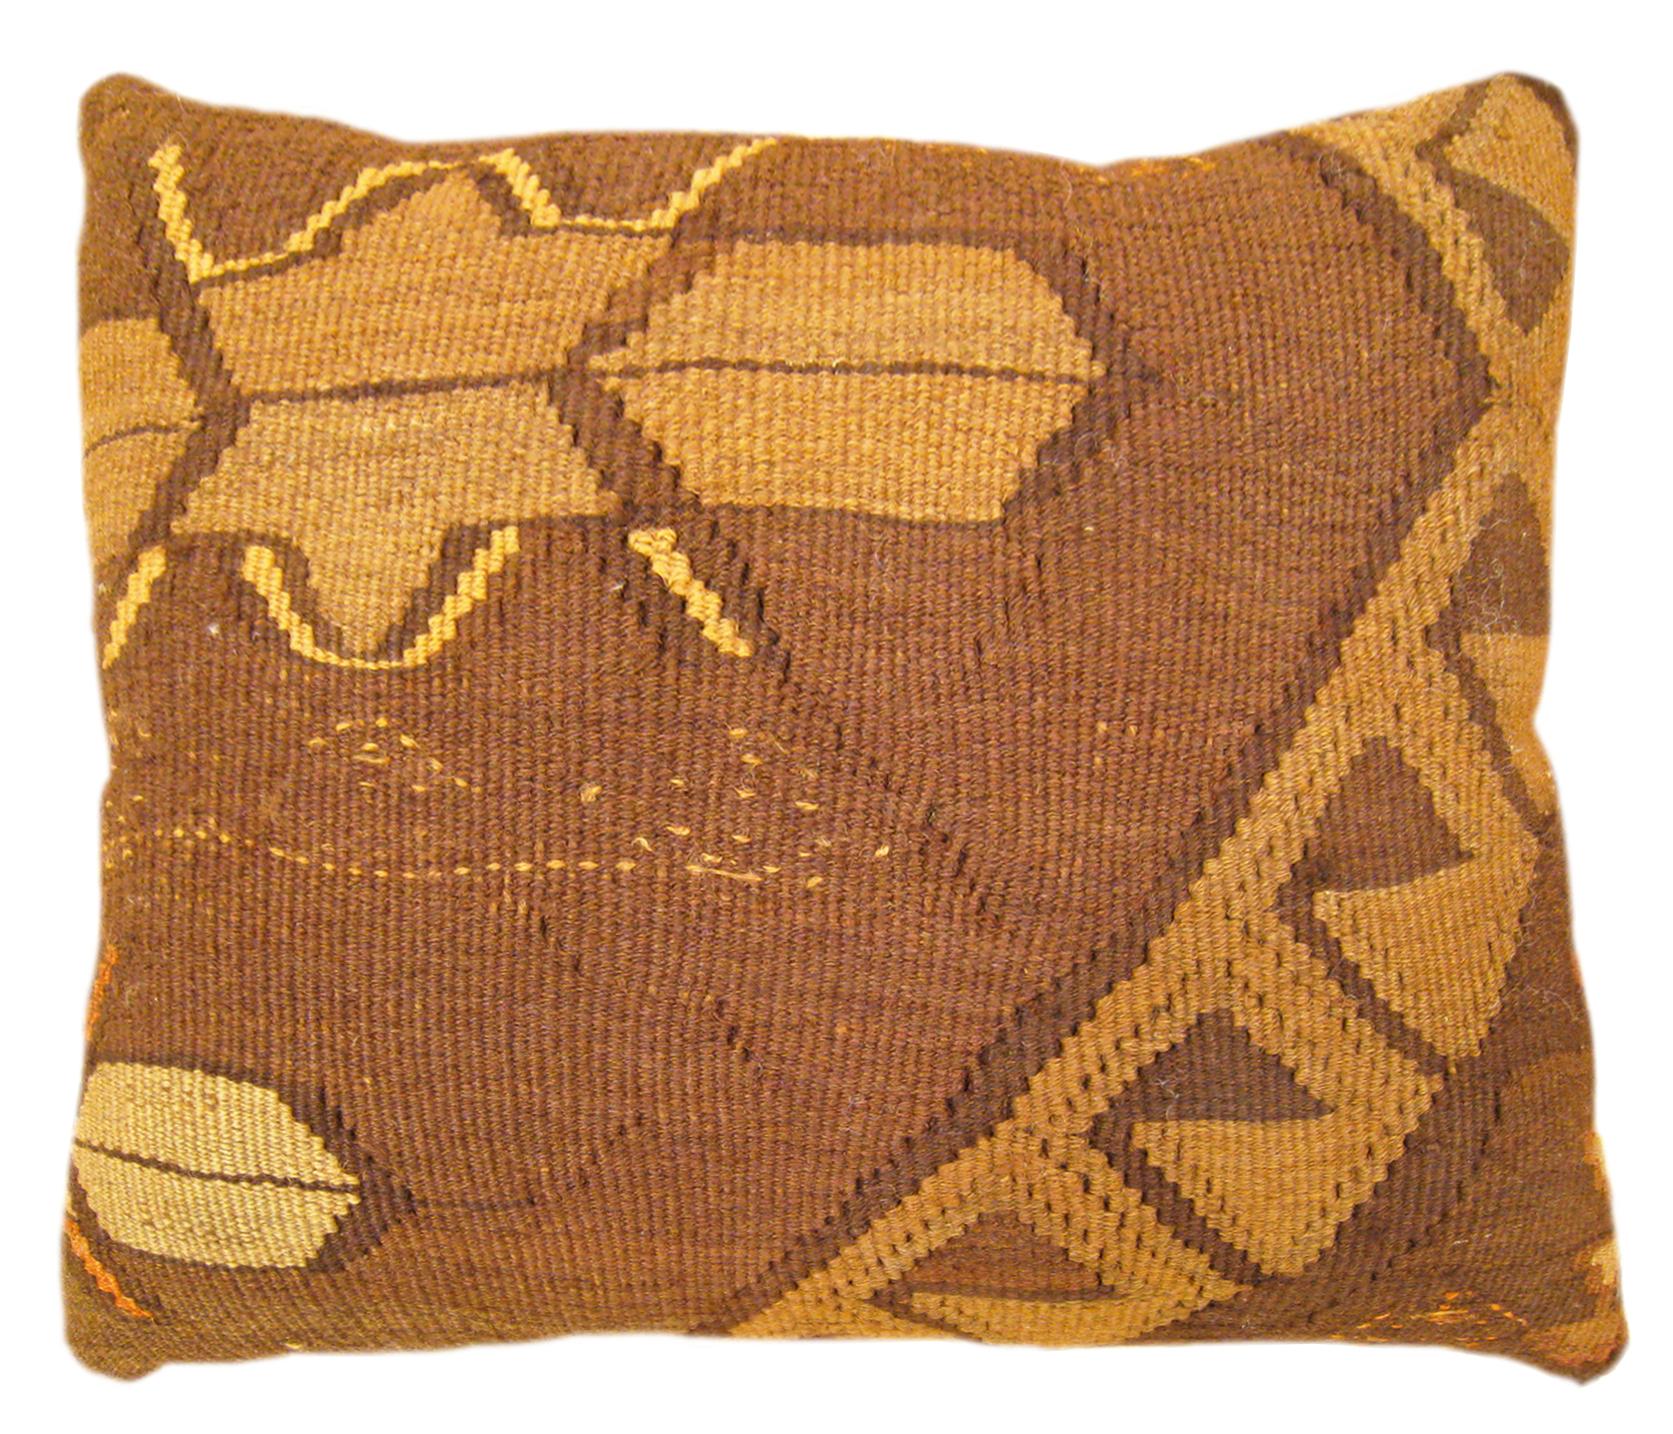 Mid-20th Century A Set of Decorative Vintage Turkish Kilim Pillows with Geometric Abstracts For Sale